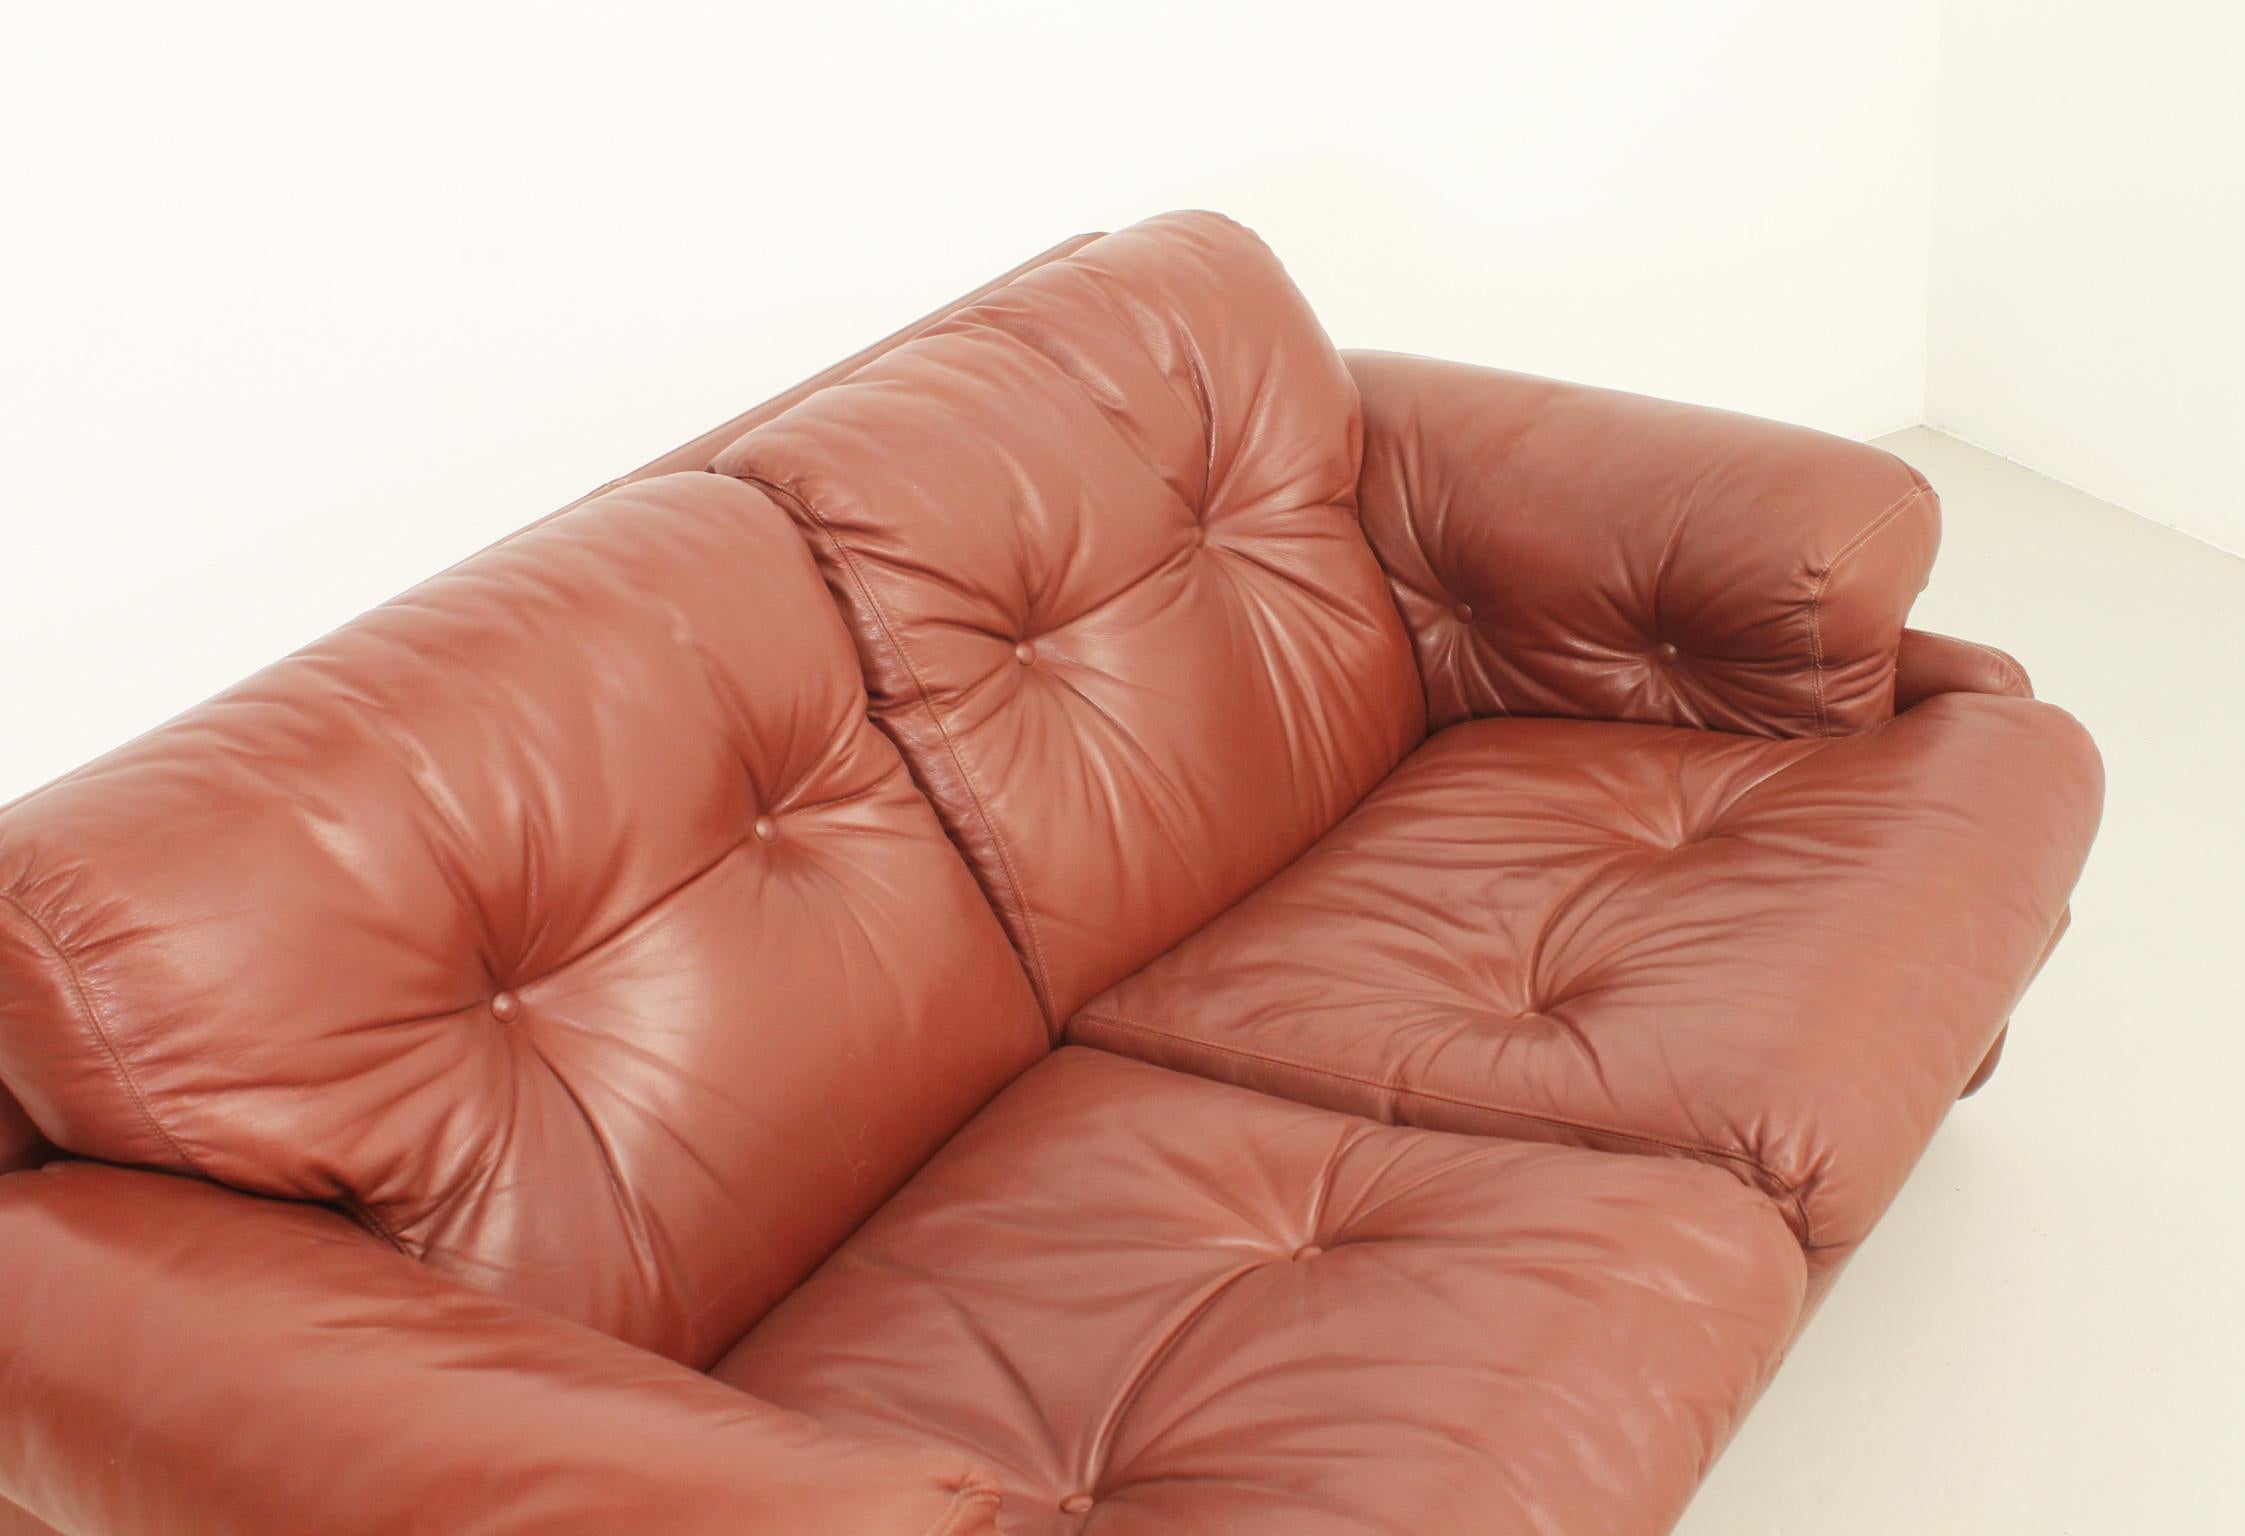 Coronado Two-seater Sofa by Tobia Scarpa in Cognac Leather, 1969 For Sale 4